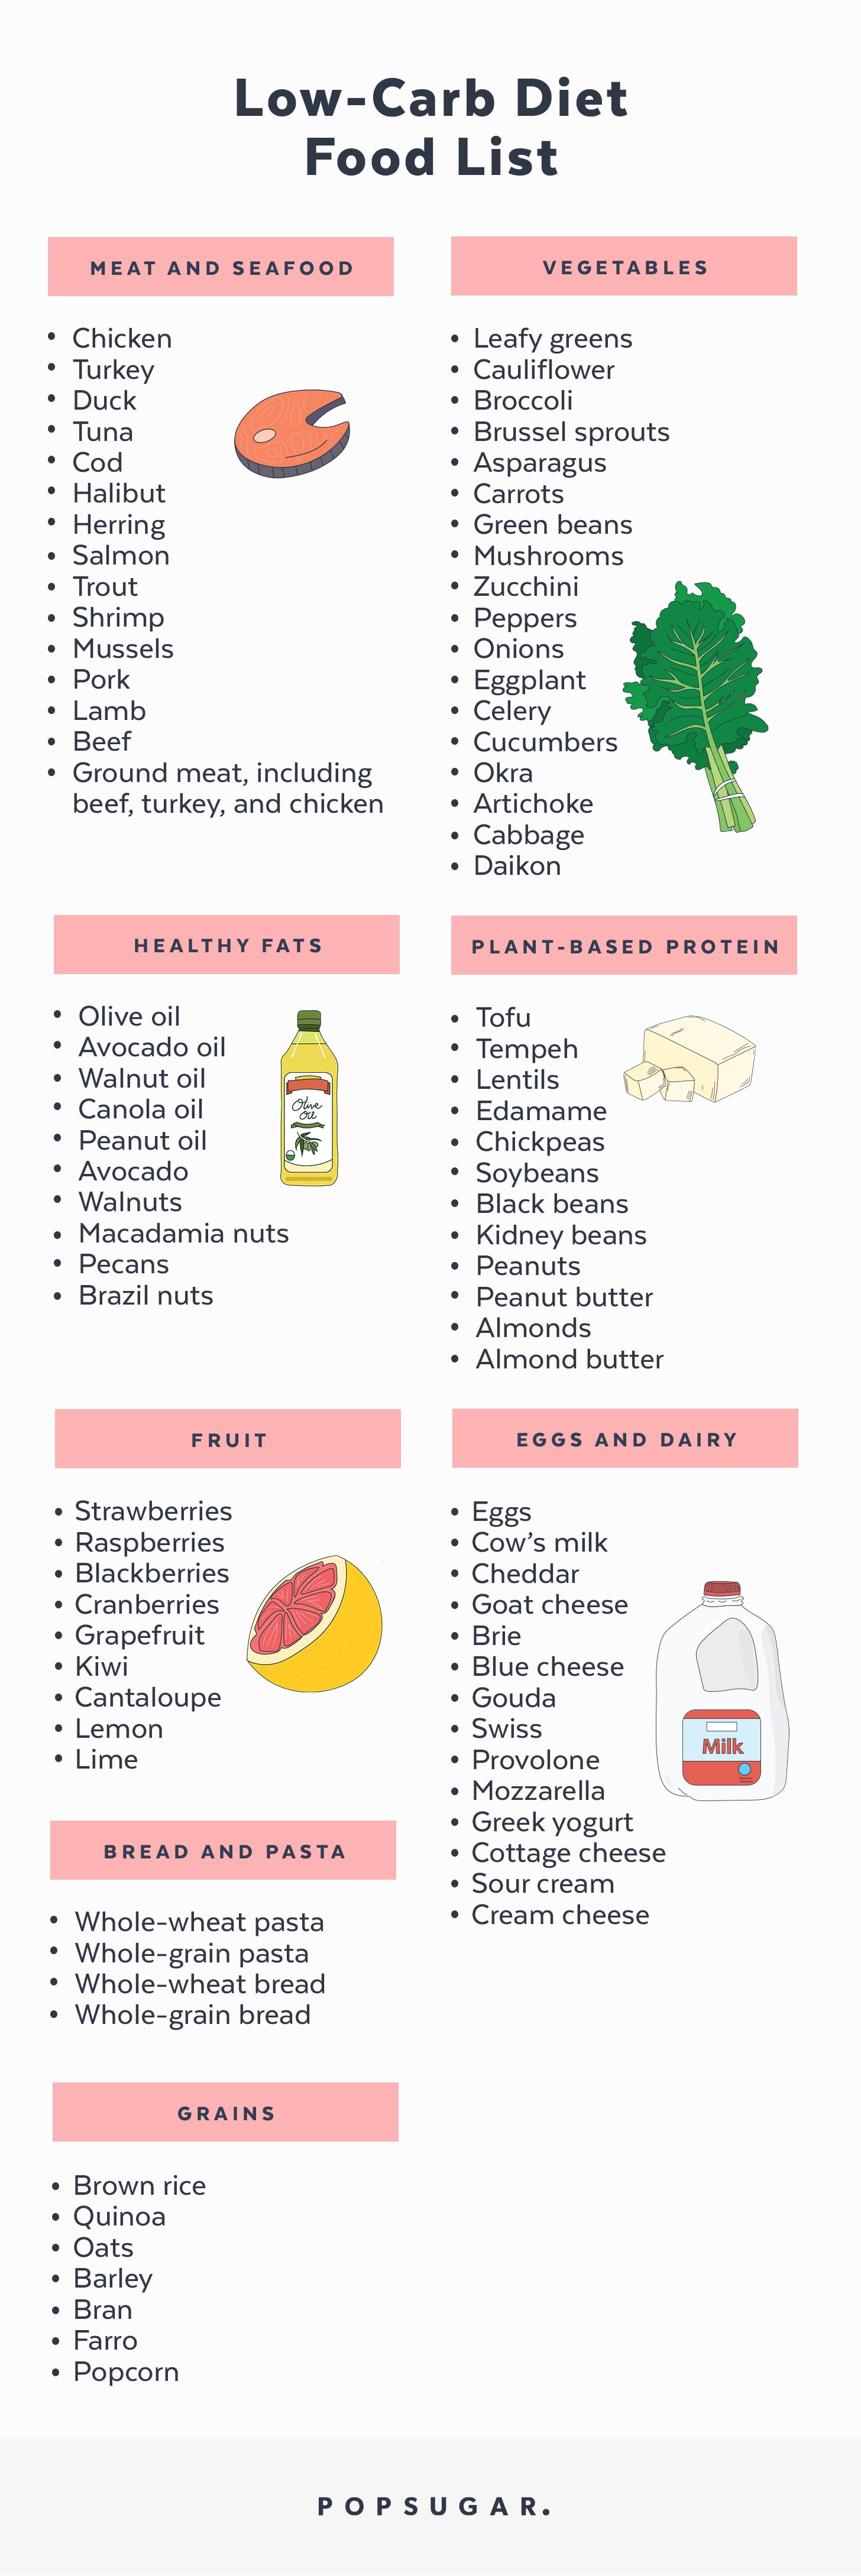 list of fat foods for low carb diet